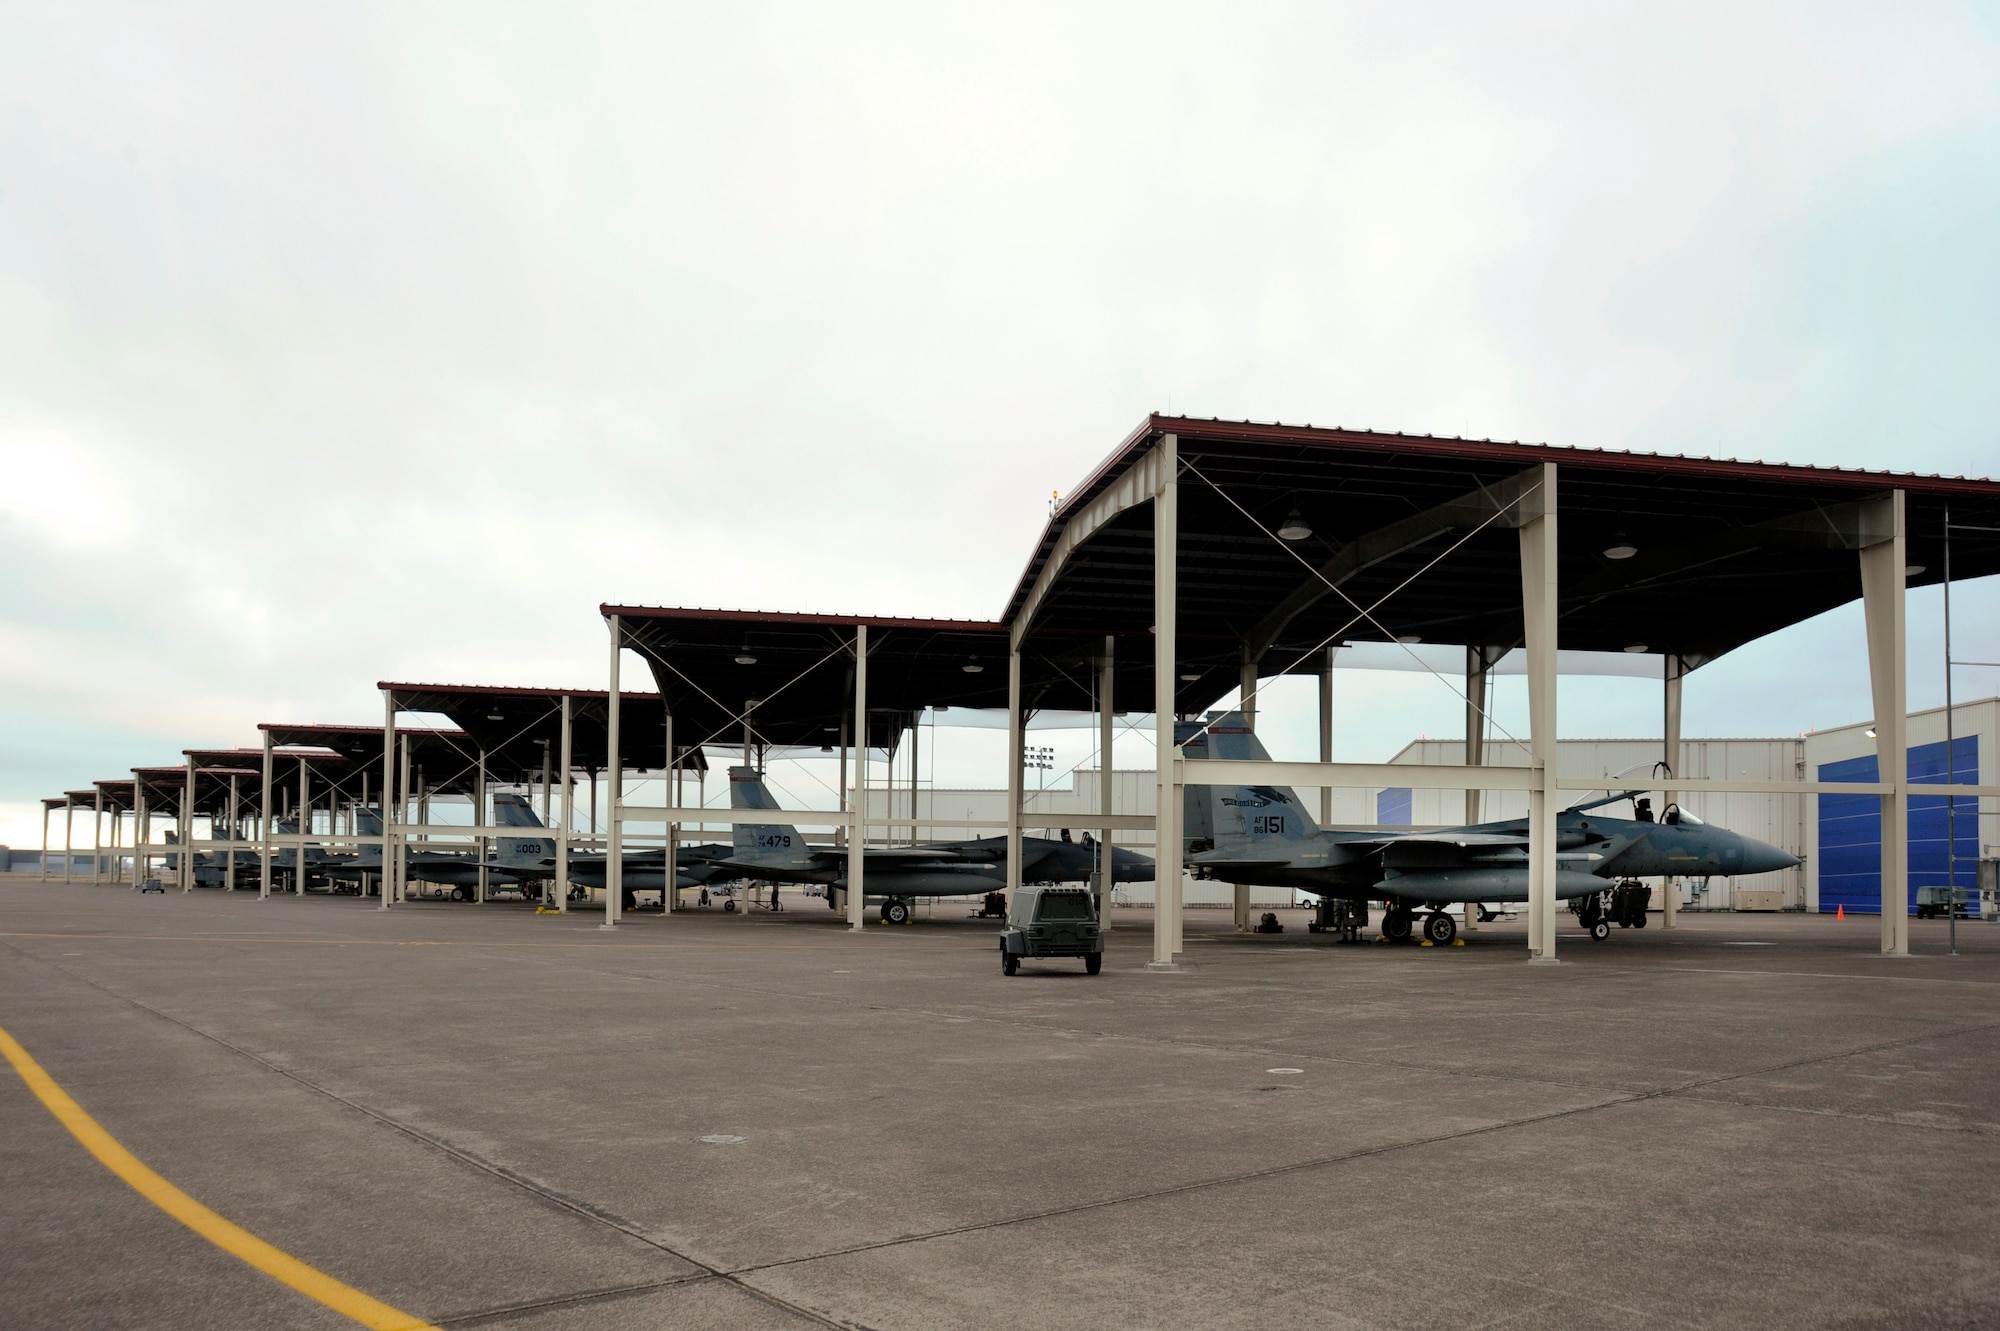 A view of the Portland Air National Guard Base, Ore., flightline, Aug. 28, 2014, after nine new aircraft shelters have been completed to help protect the 142nd Fighter Wing F-15 Eagles from environmental elements. (U.S. Air National Guard photo by Tech. Sgt. John Hughel, 142nd Fighter Wing Public Affairs/Released)